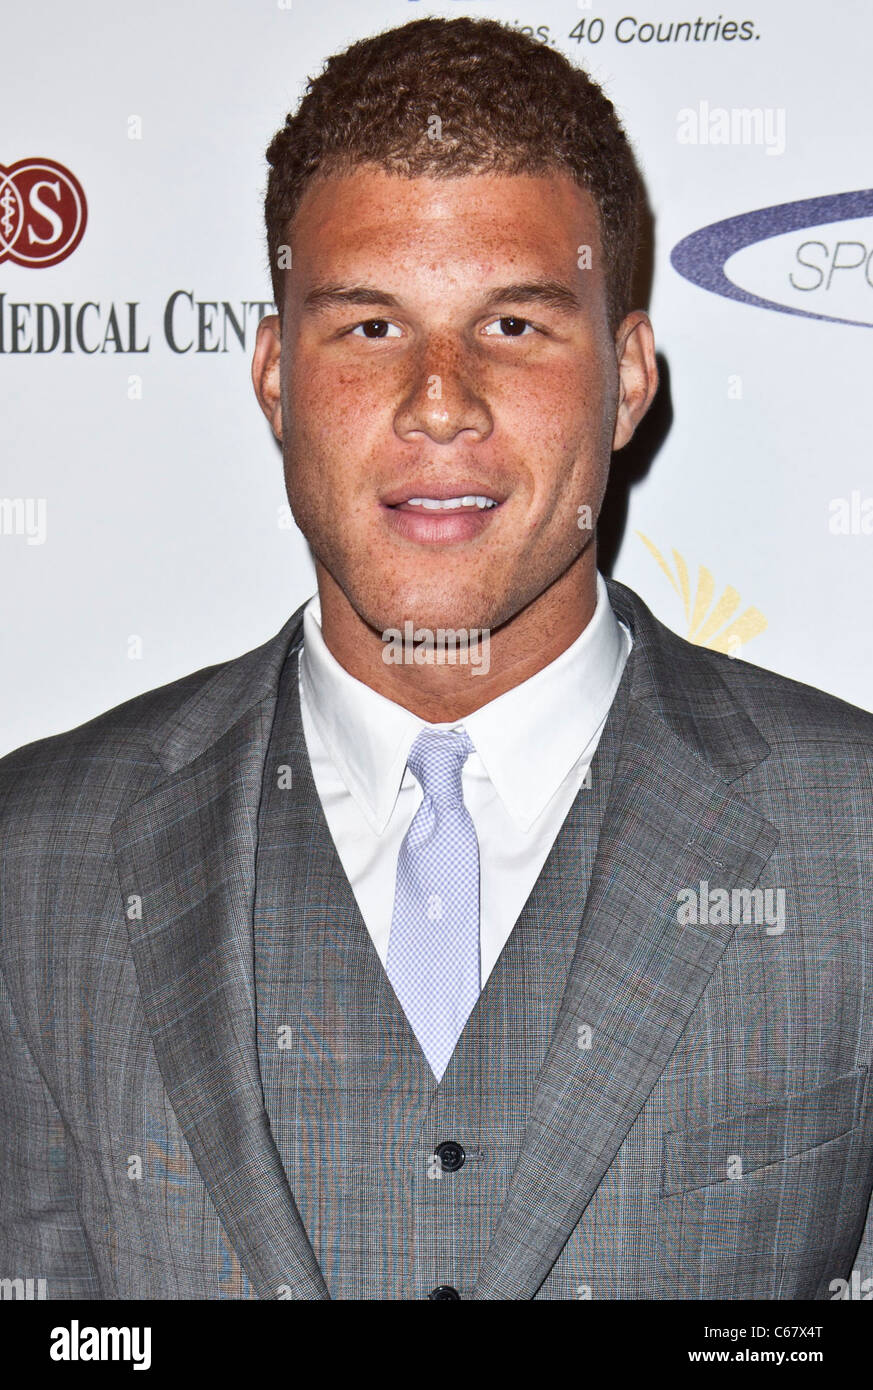 Blake Griffin at arrivals for 26th Anniversary Sports Spectacular, Hyatt Regency Century Plaza Hotel, Los Angeles, CA May 22, 2011. Photo By: Emiley Schweich/Everett Collection Stock Photo